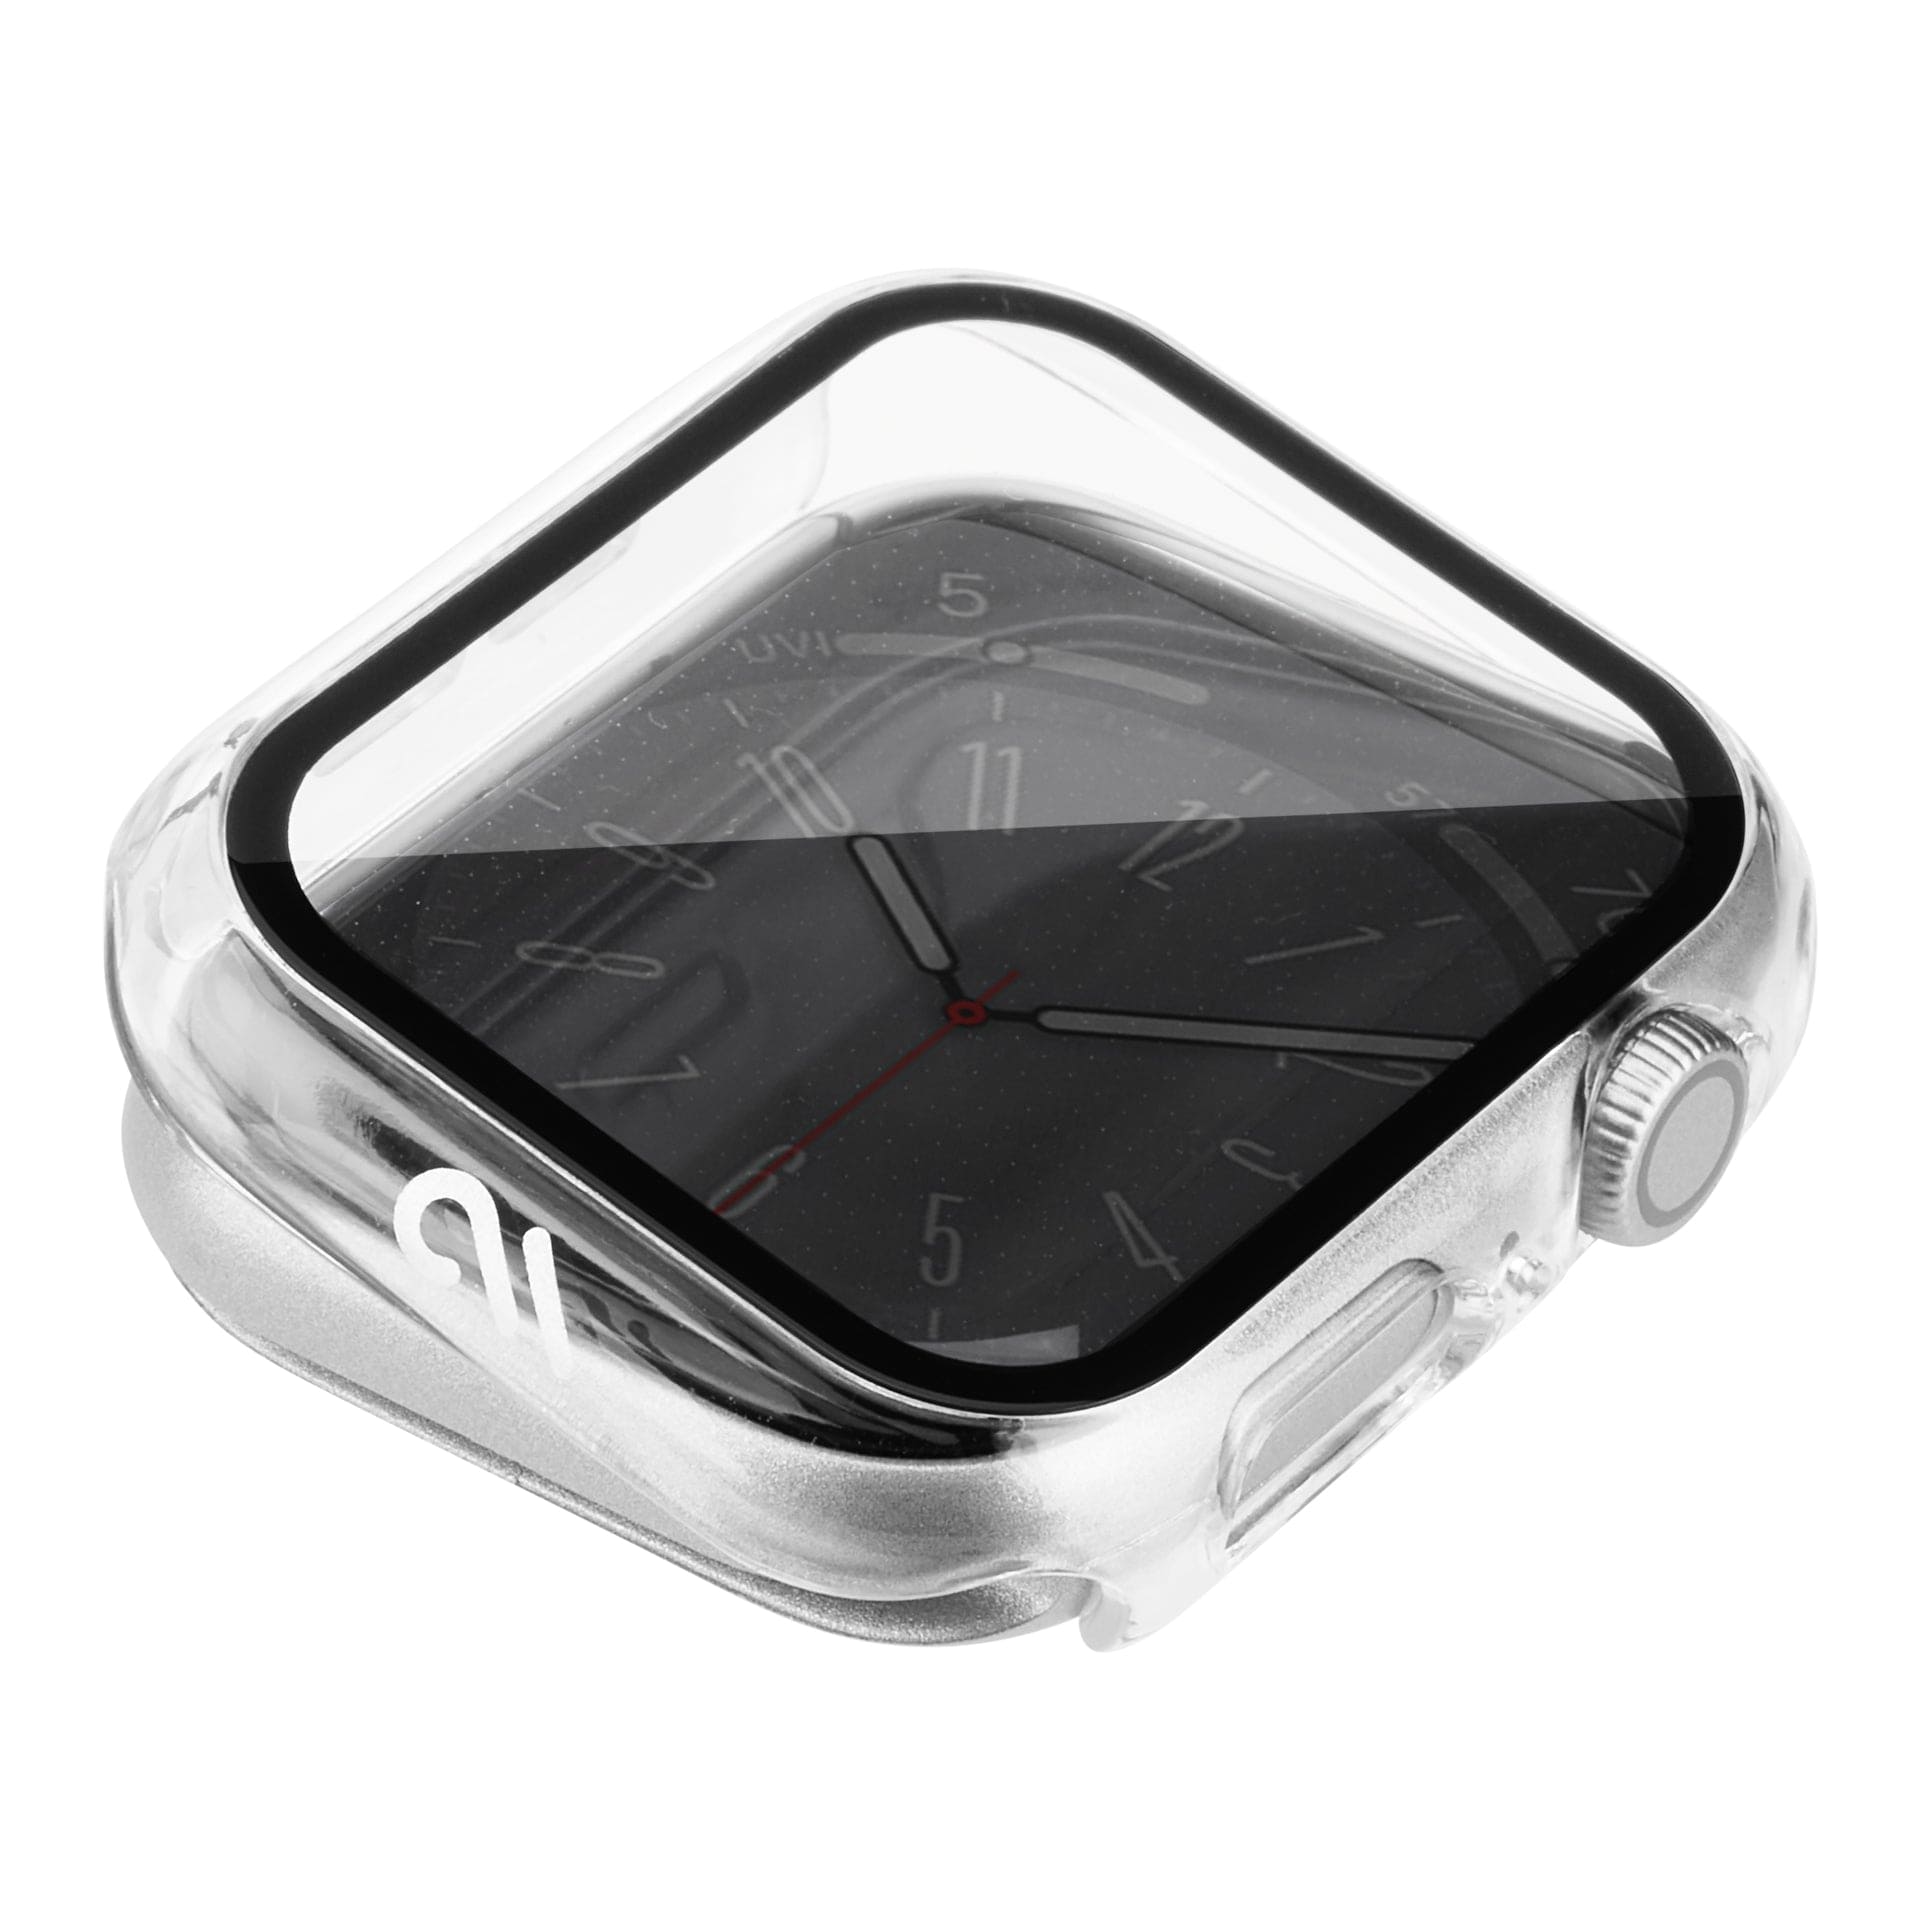 Integrated Screen Protector protects Apple Watch screen from scratches and cracks.